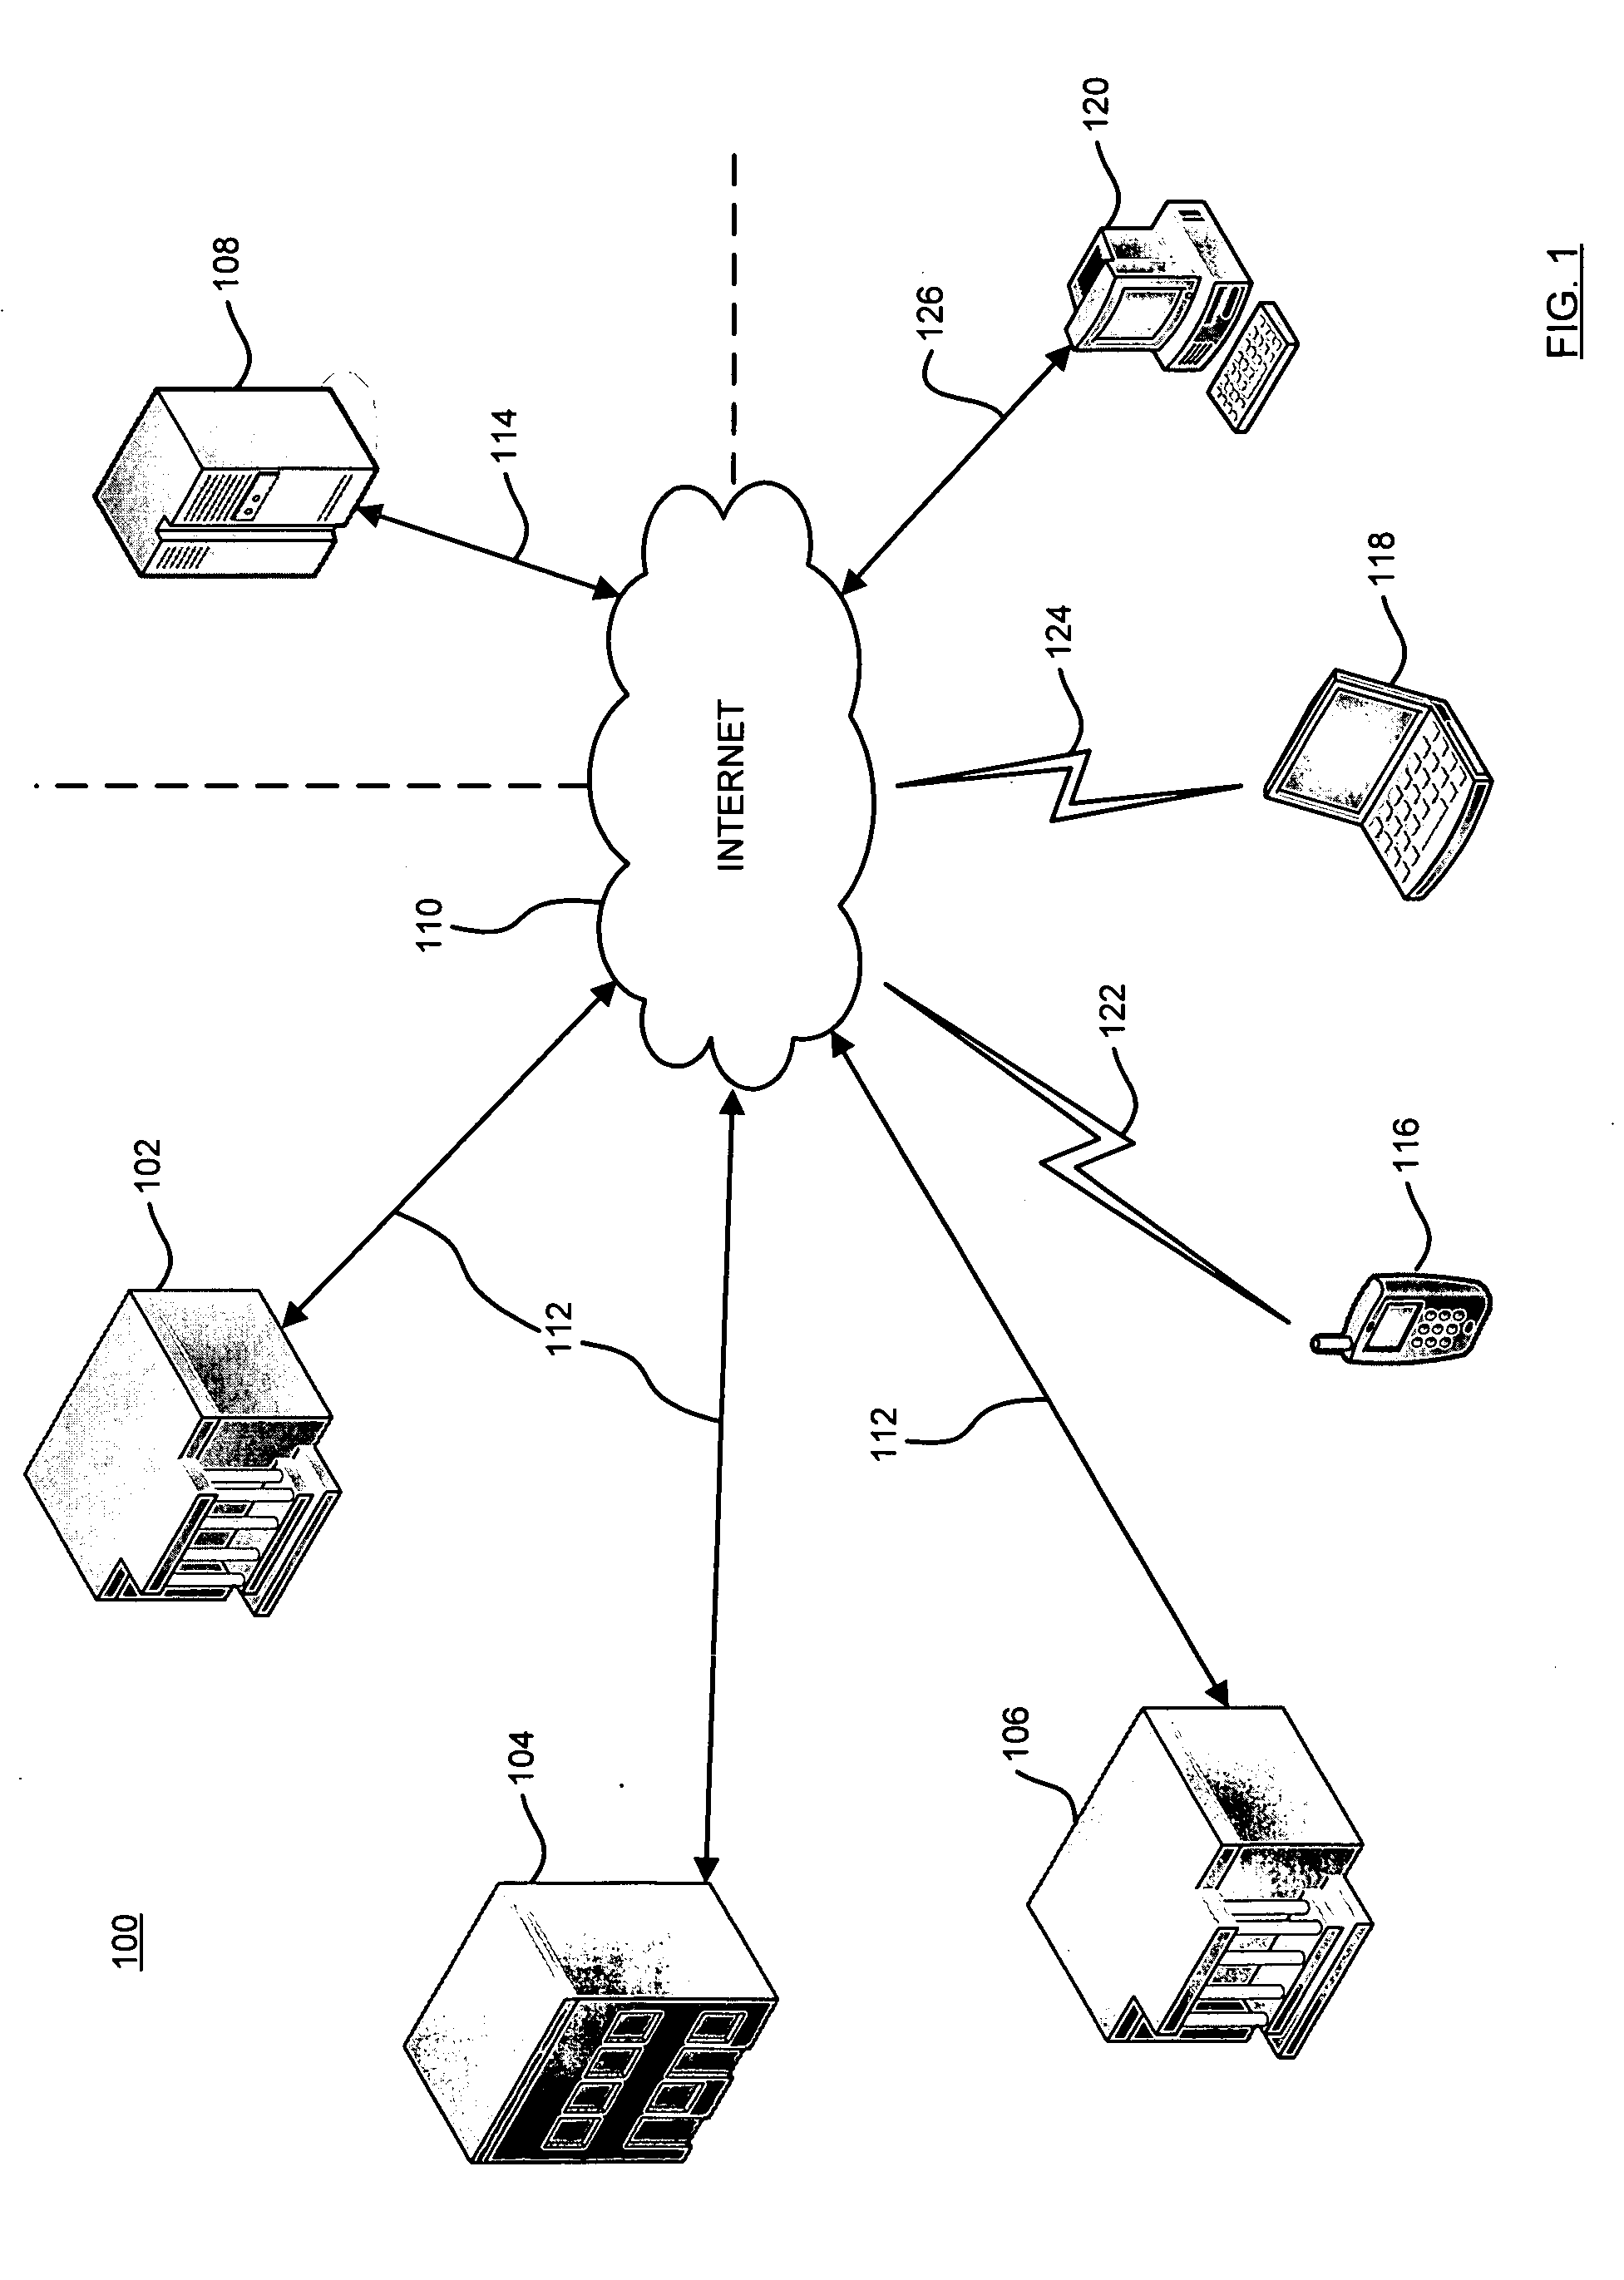 System and method for controlling access to a local inventory storage system via a remote e-commerce application